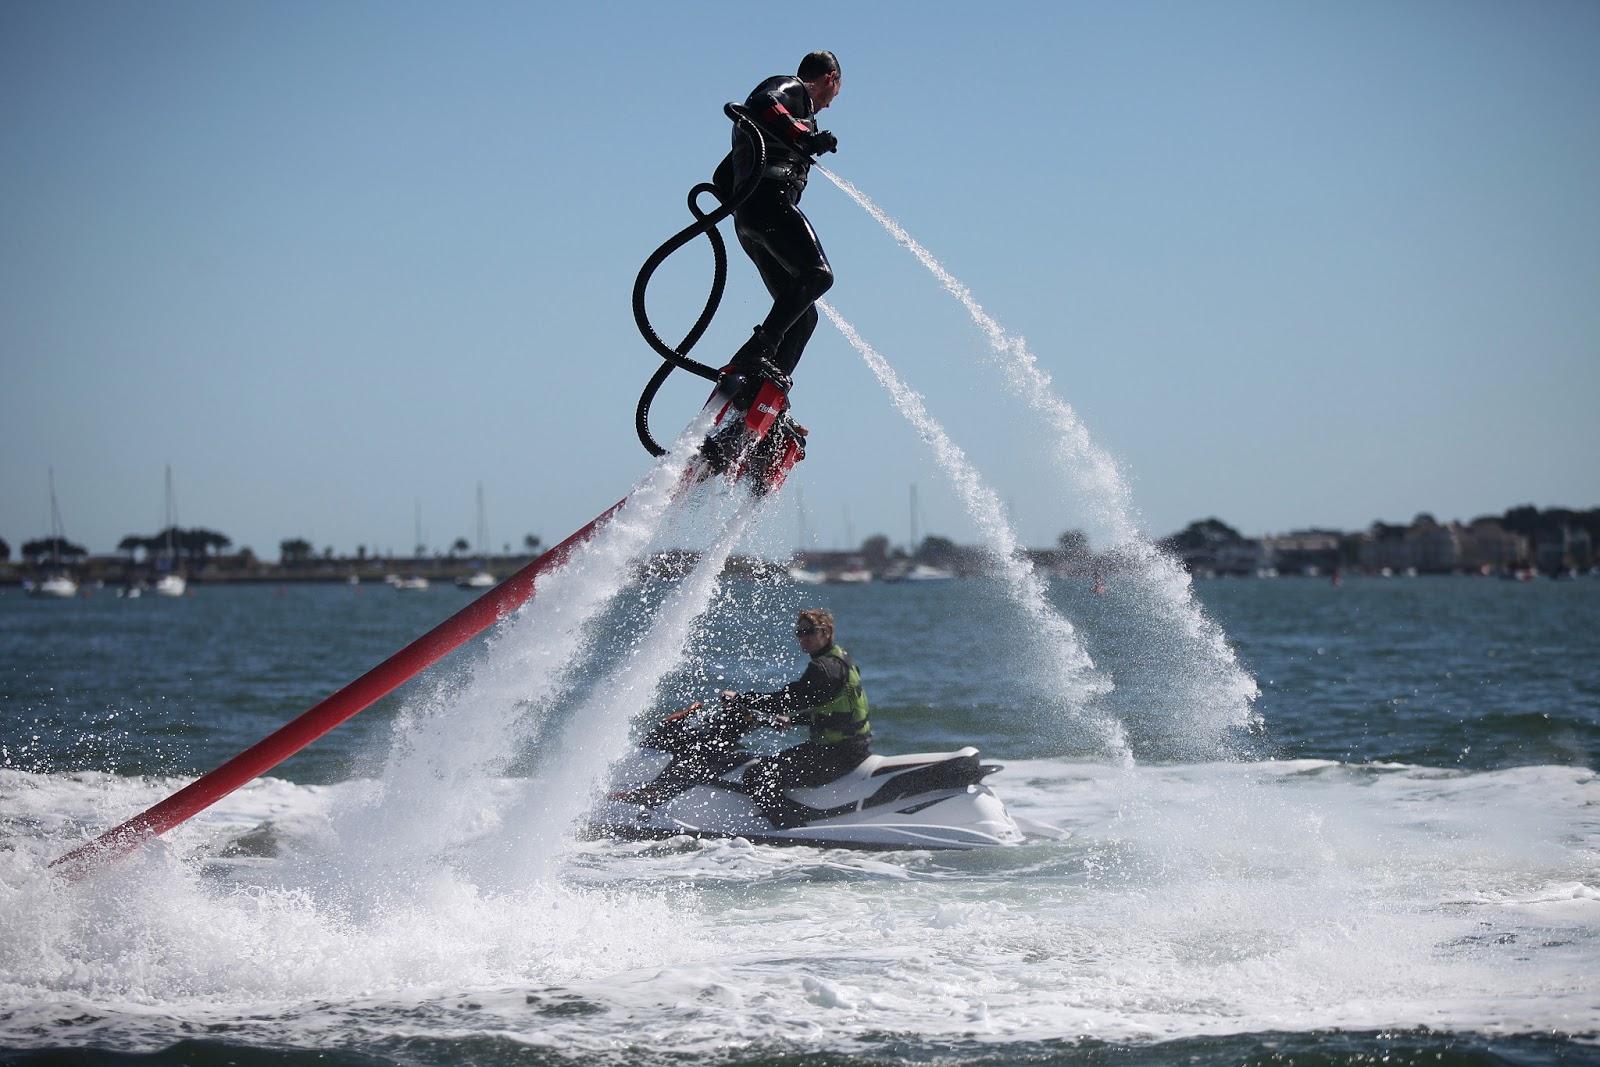 Extreme Water Jet Pack Riding - The Flyboard has taken off in Poole Harbour...